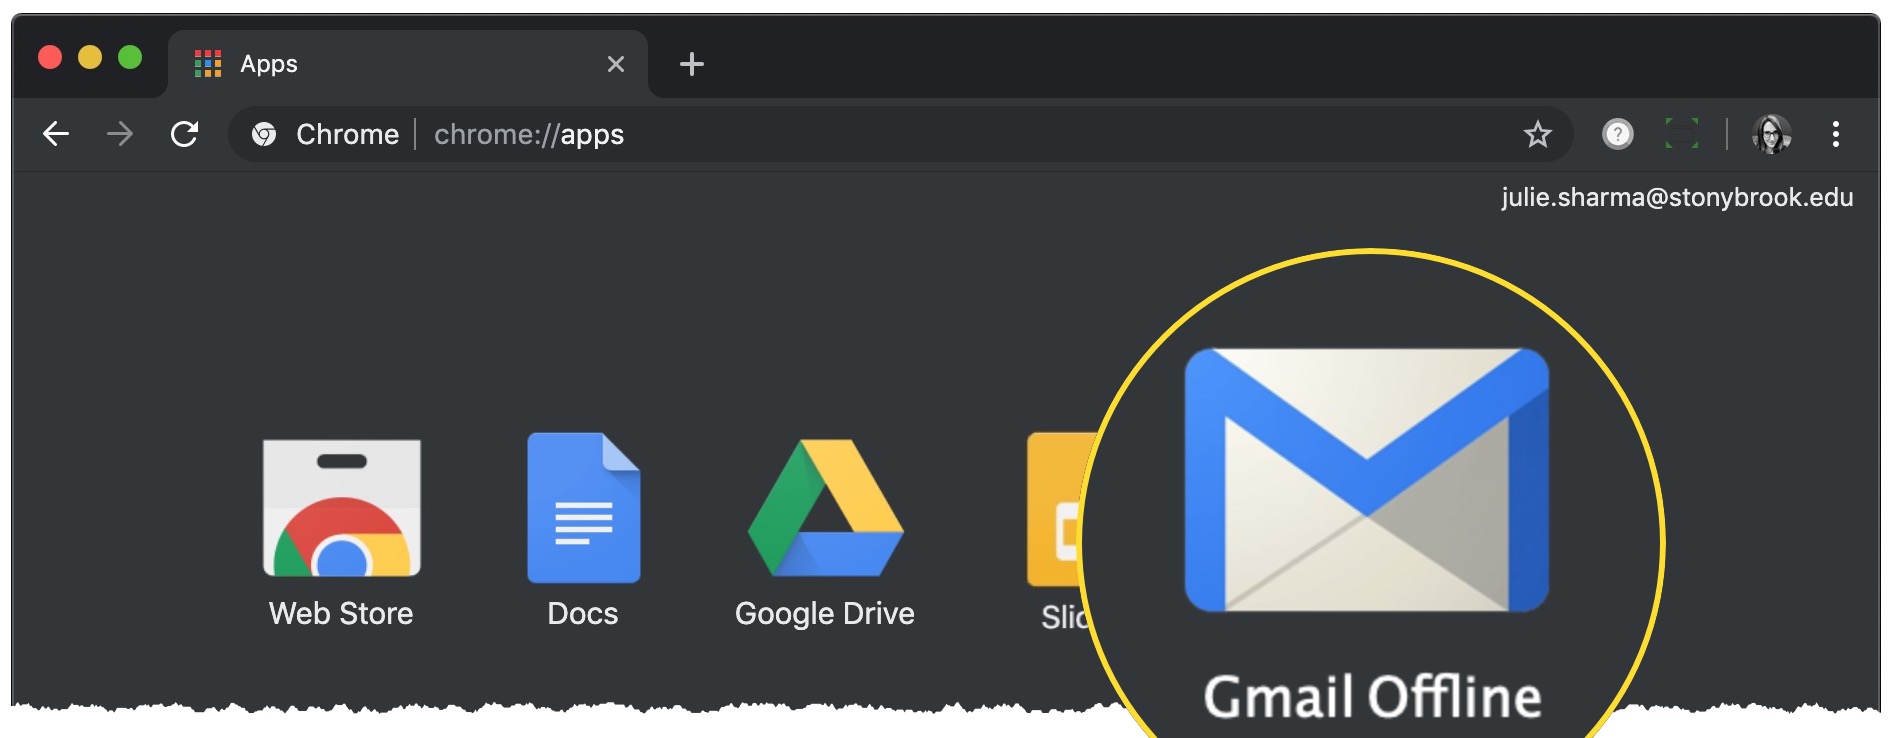 gmail offline at chrome://apps